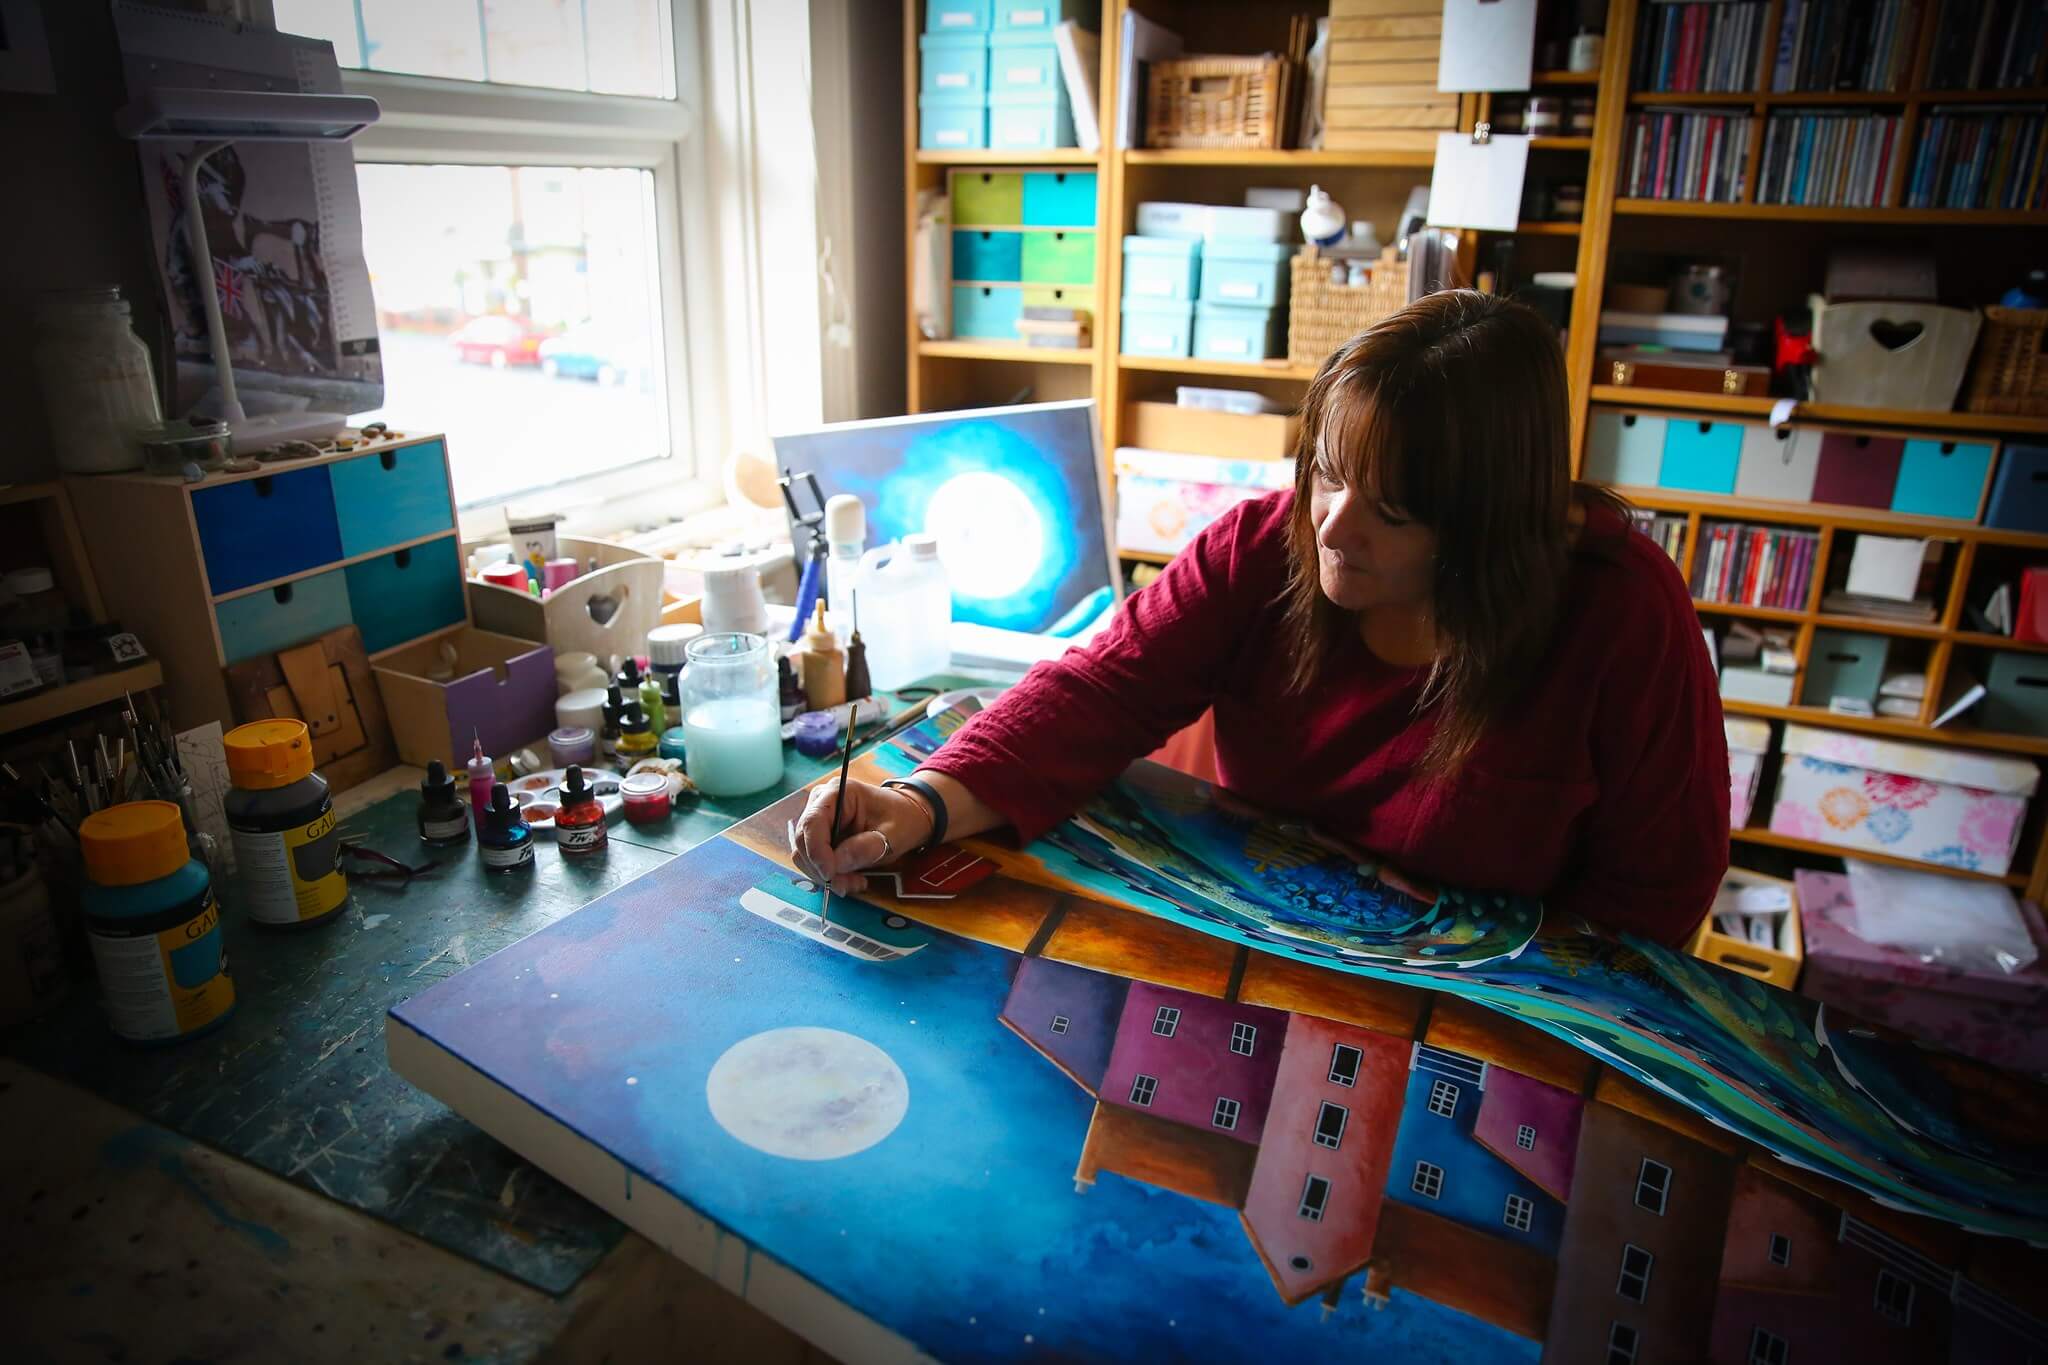 Photograph showing Briget Wilkinson working on one of her paintings in her studio in the UK.